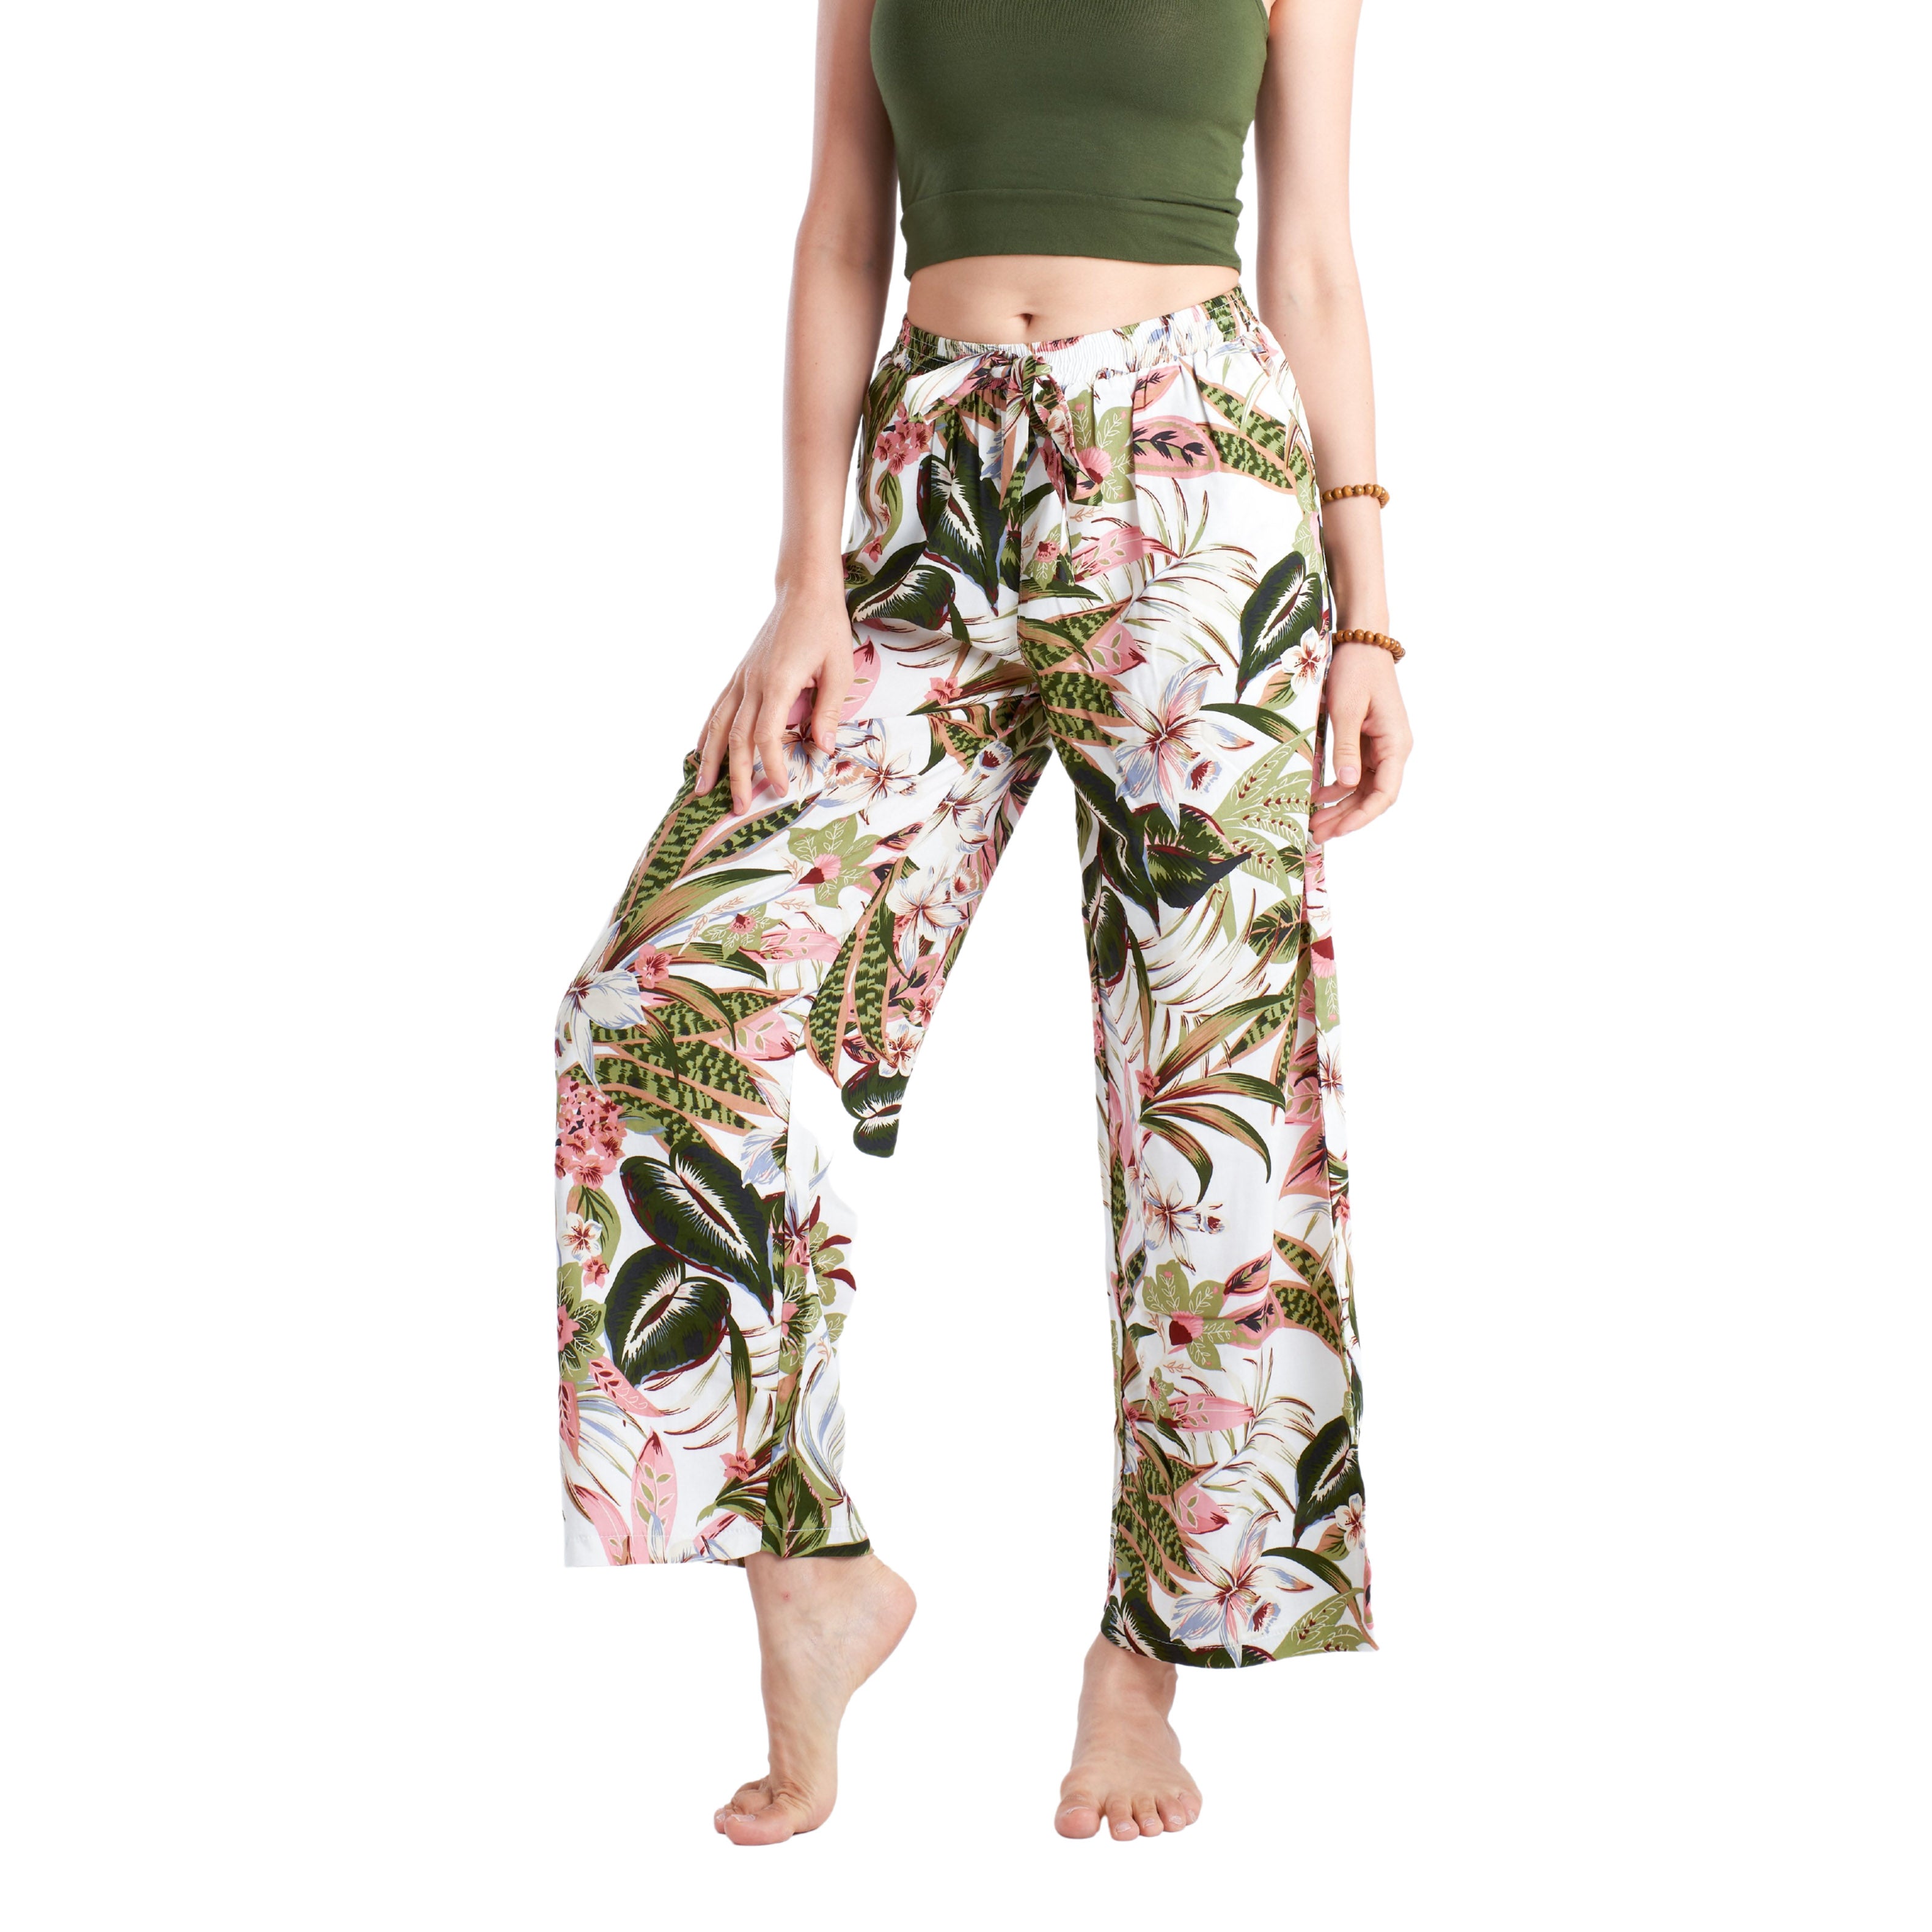 VENUS PANTS Elepanta Casual Pants - Buy Today Elephant Pants Jewelry And Bohemian Clothes Handmade In Thailand Help To Save The Elephants FairTrade And Vegan